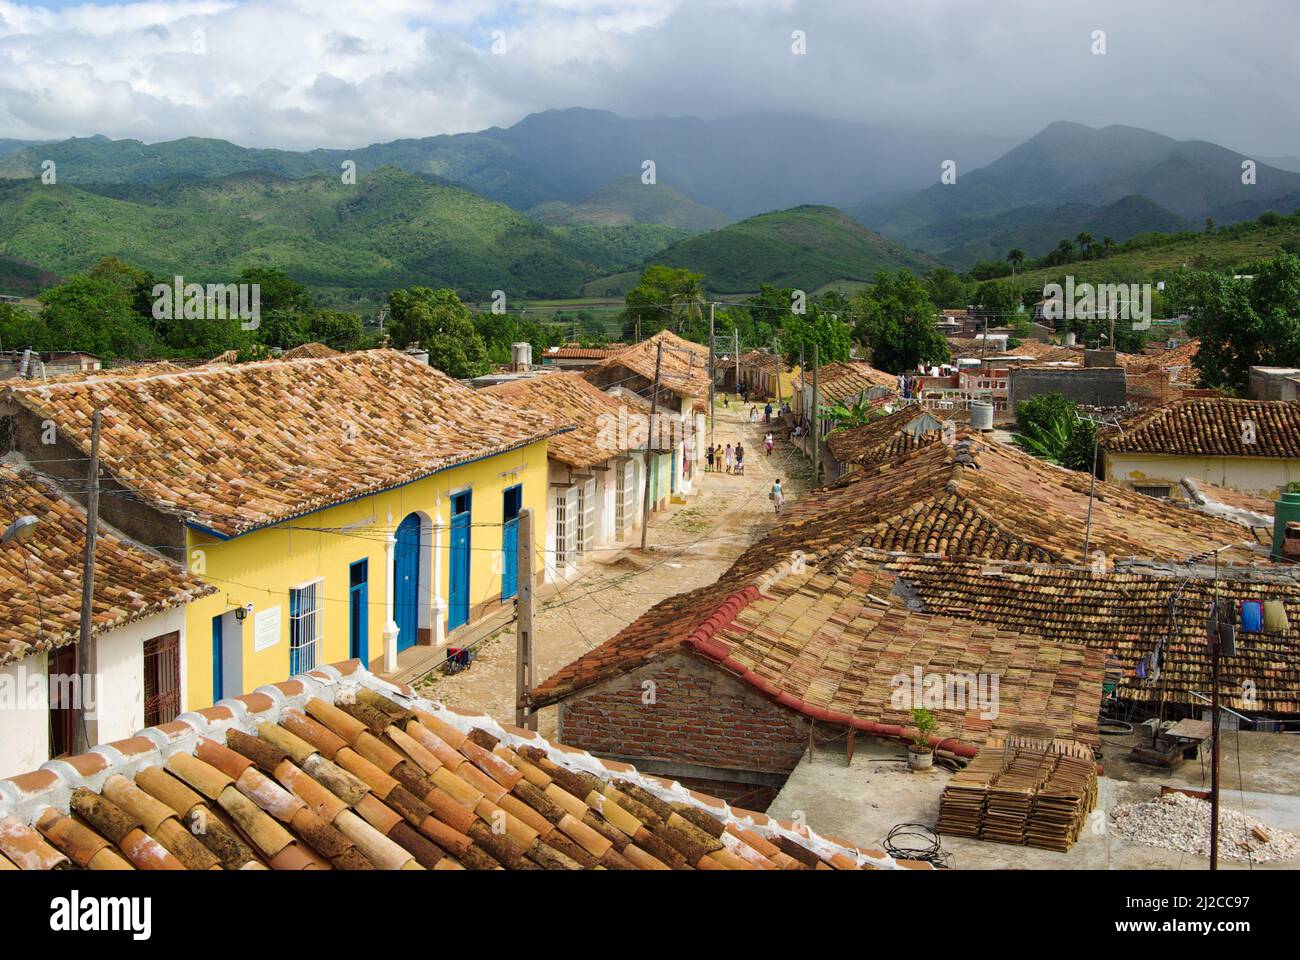 View of a street in the beautiful village of Trinidad, Cuba Stock Photo